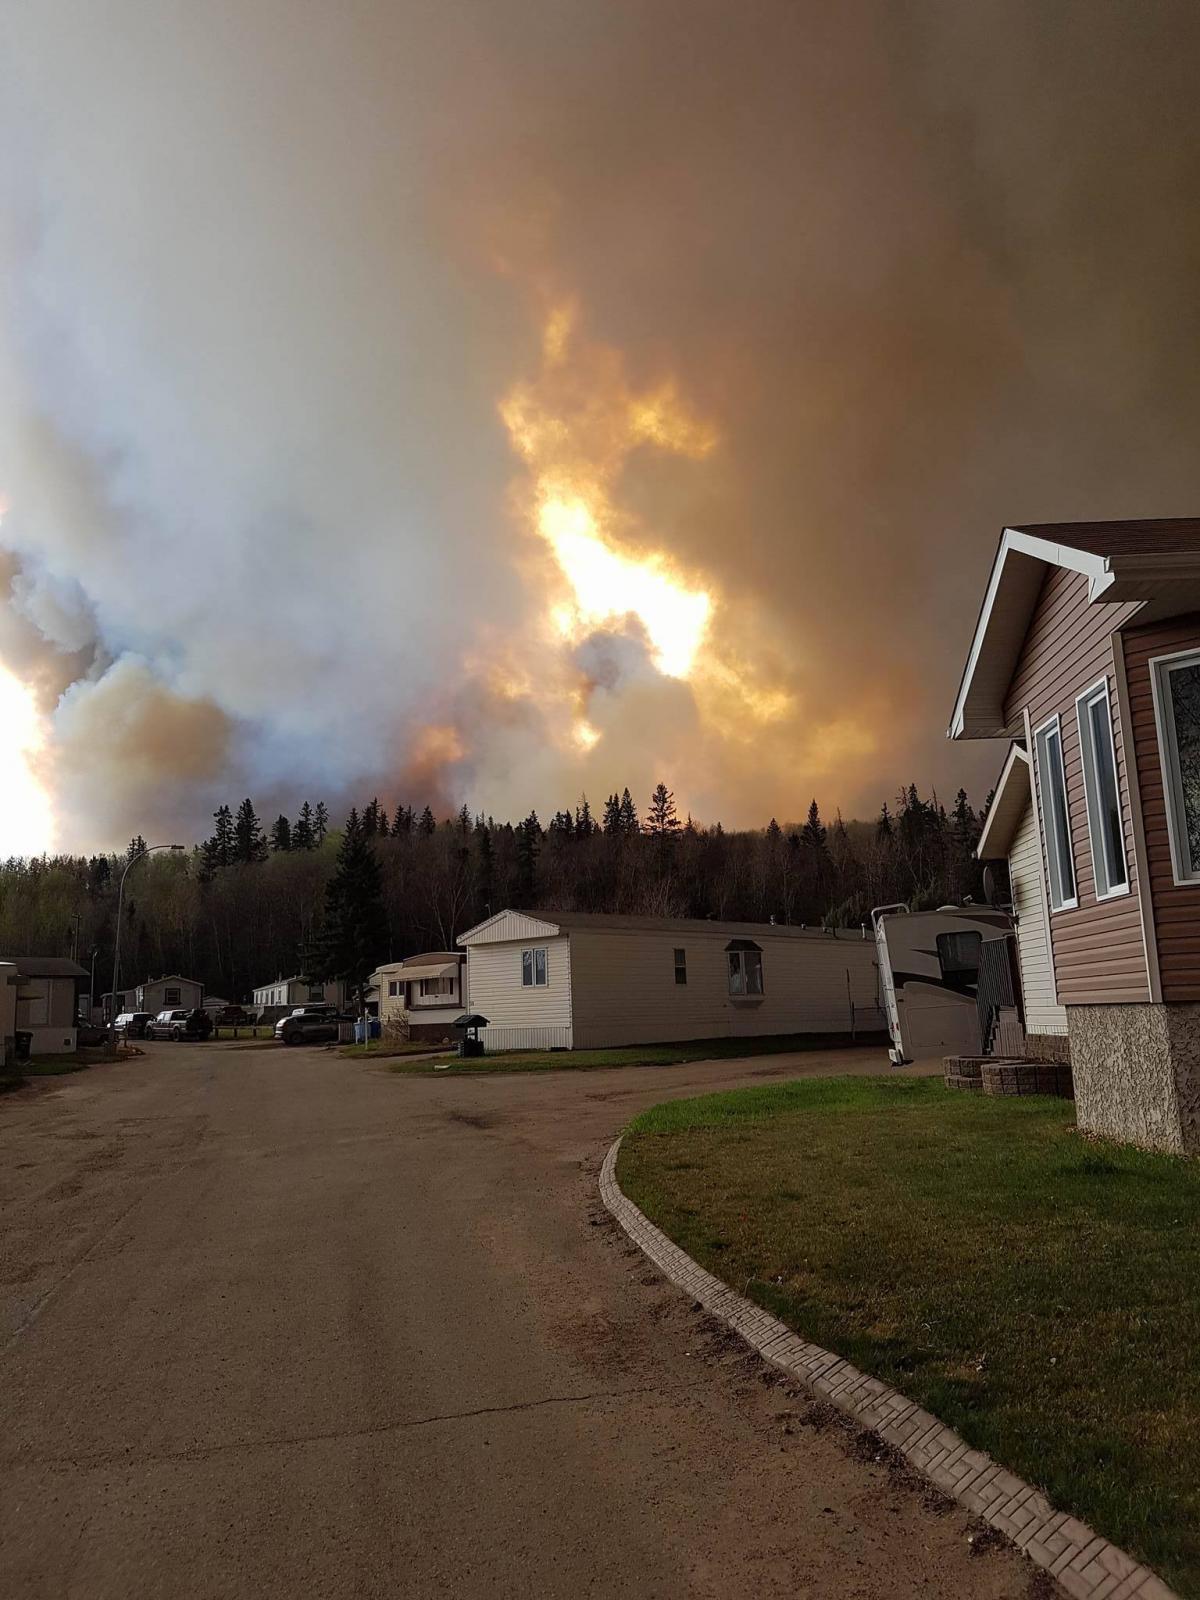 The wildfire approaches Fort McMurray, forcing the evacuation of 88,000 residents. Picture: Leia Morgan